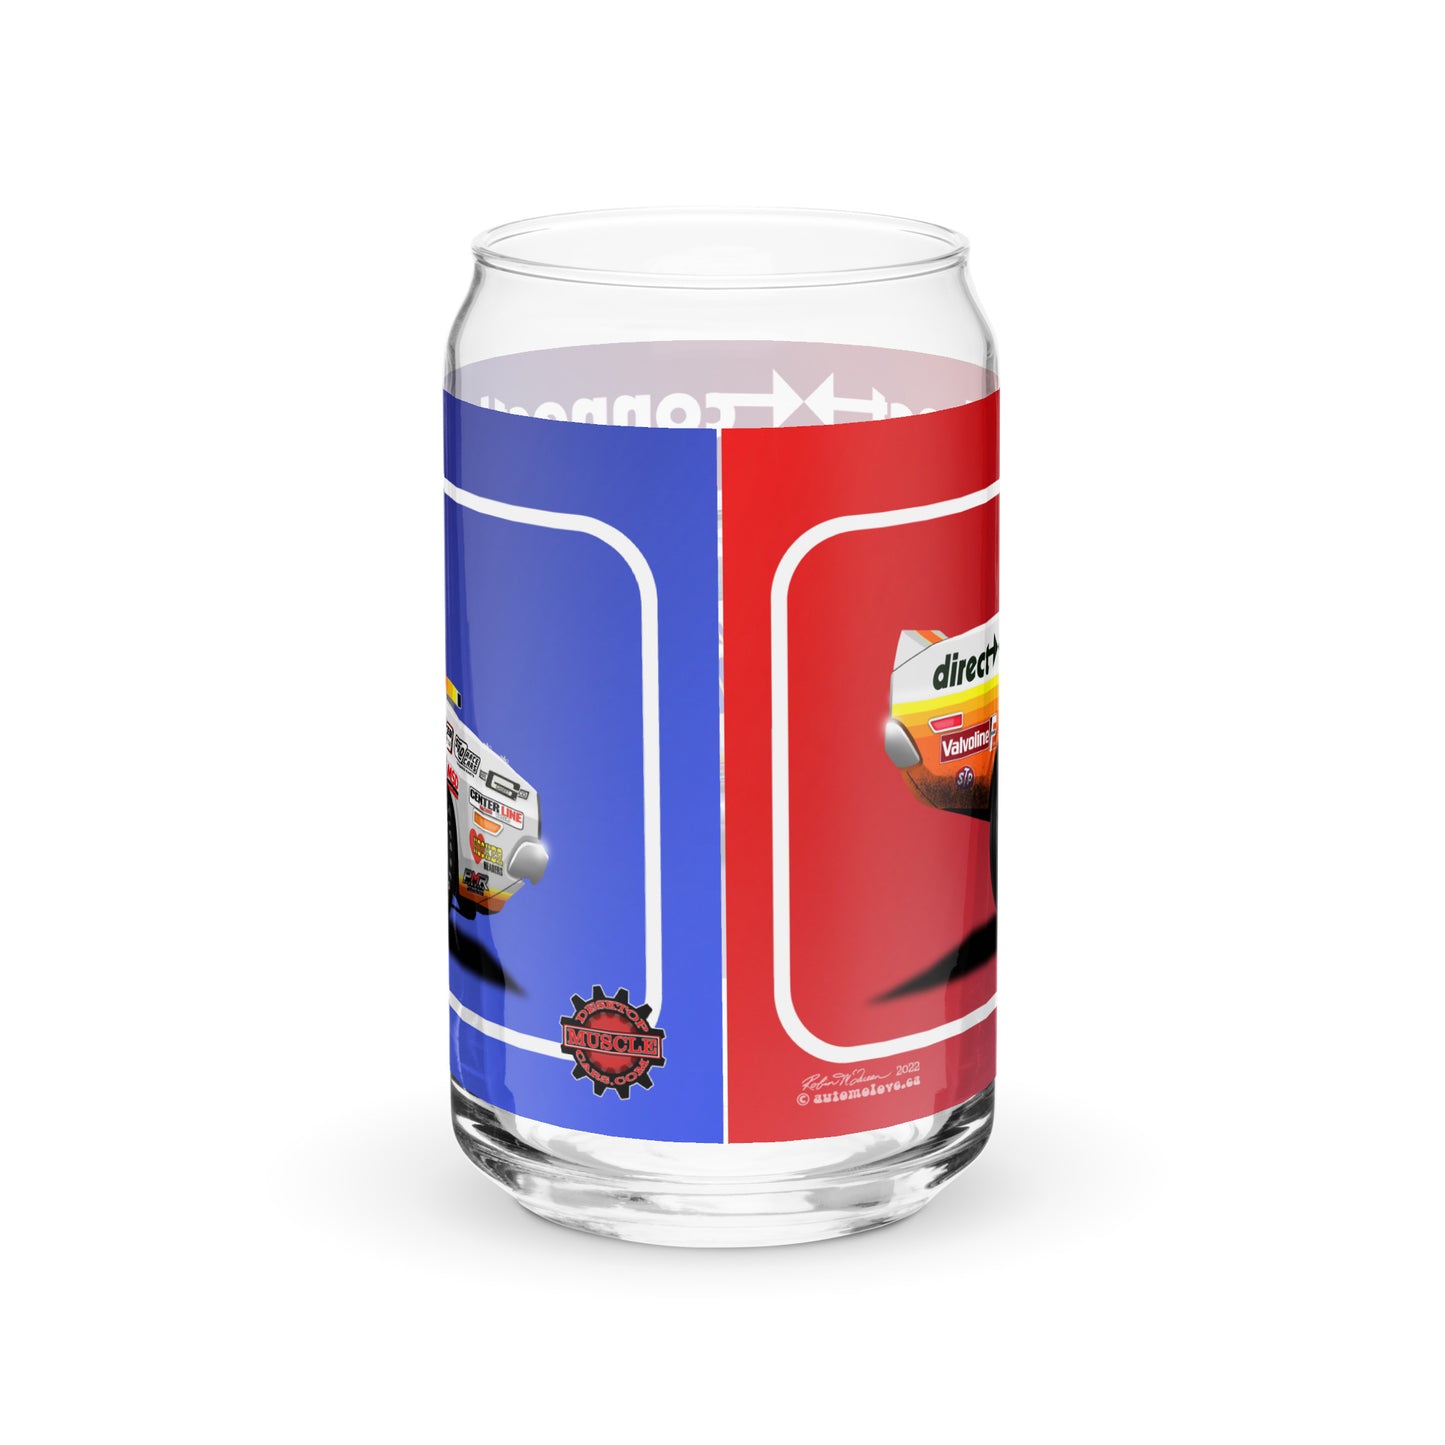 Paul Rossi 1970 Challenger Can-shaped glass